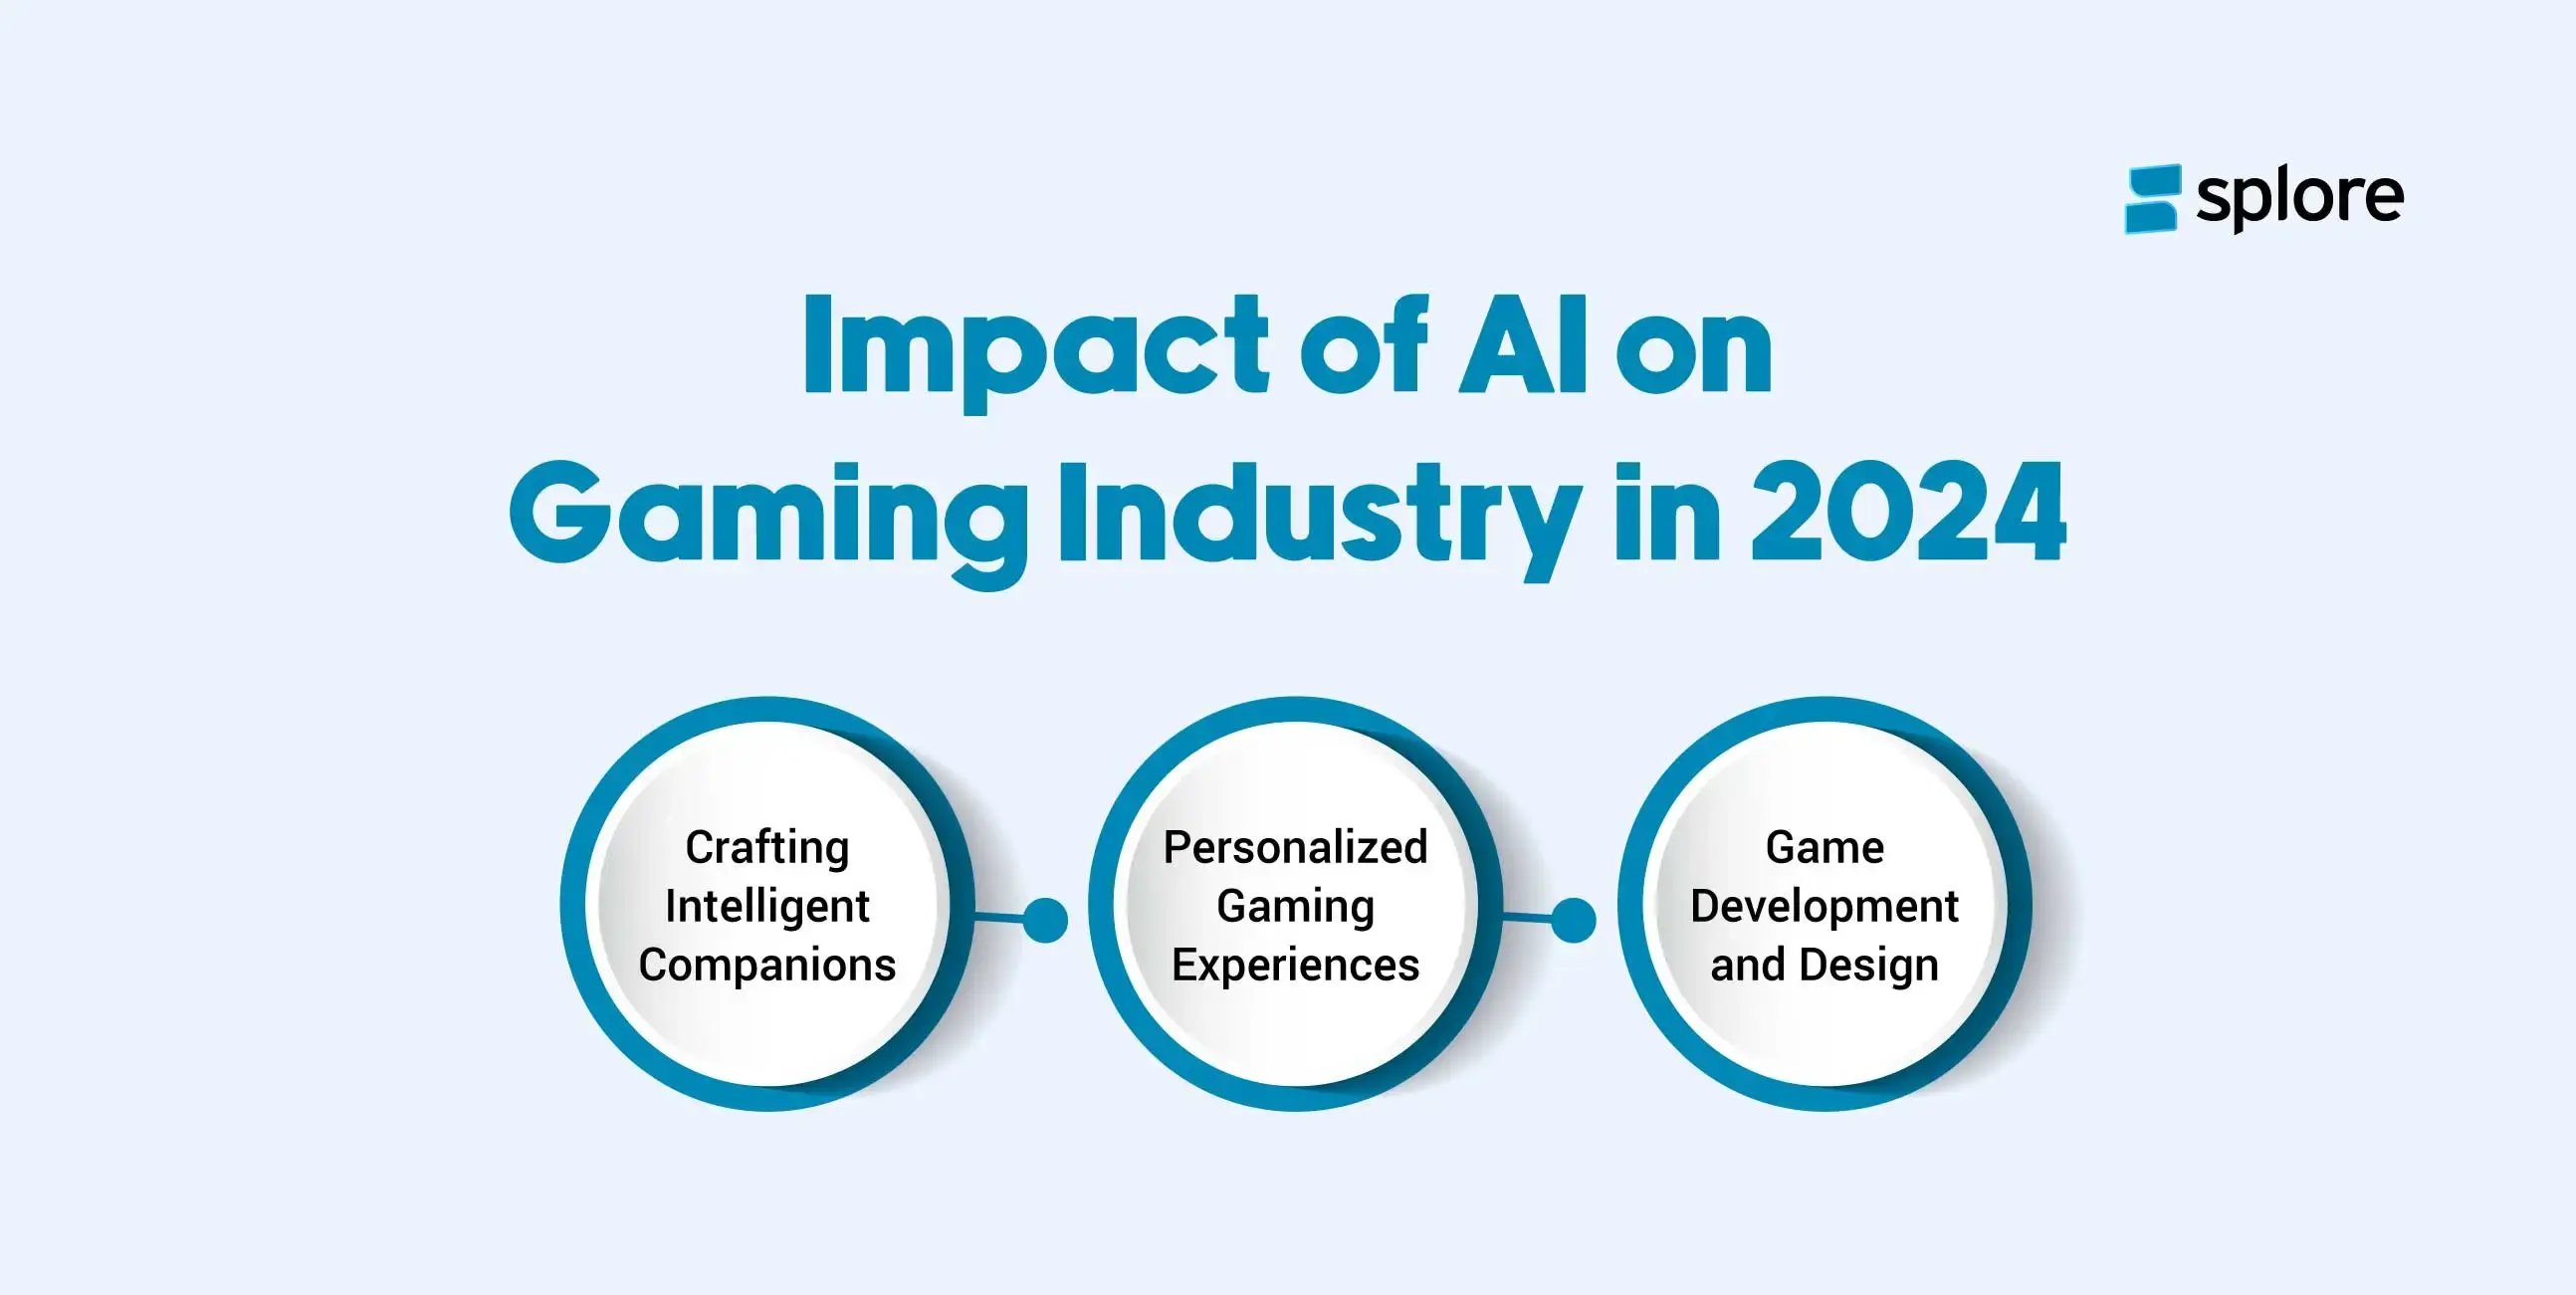 Impact of AI on Gaming Industry in 2024